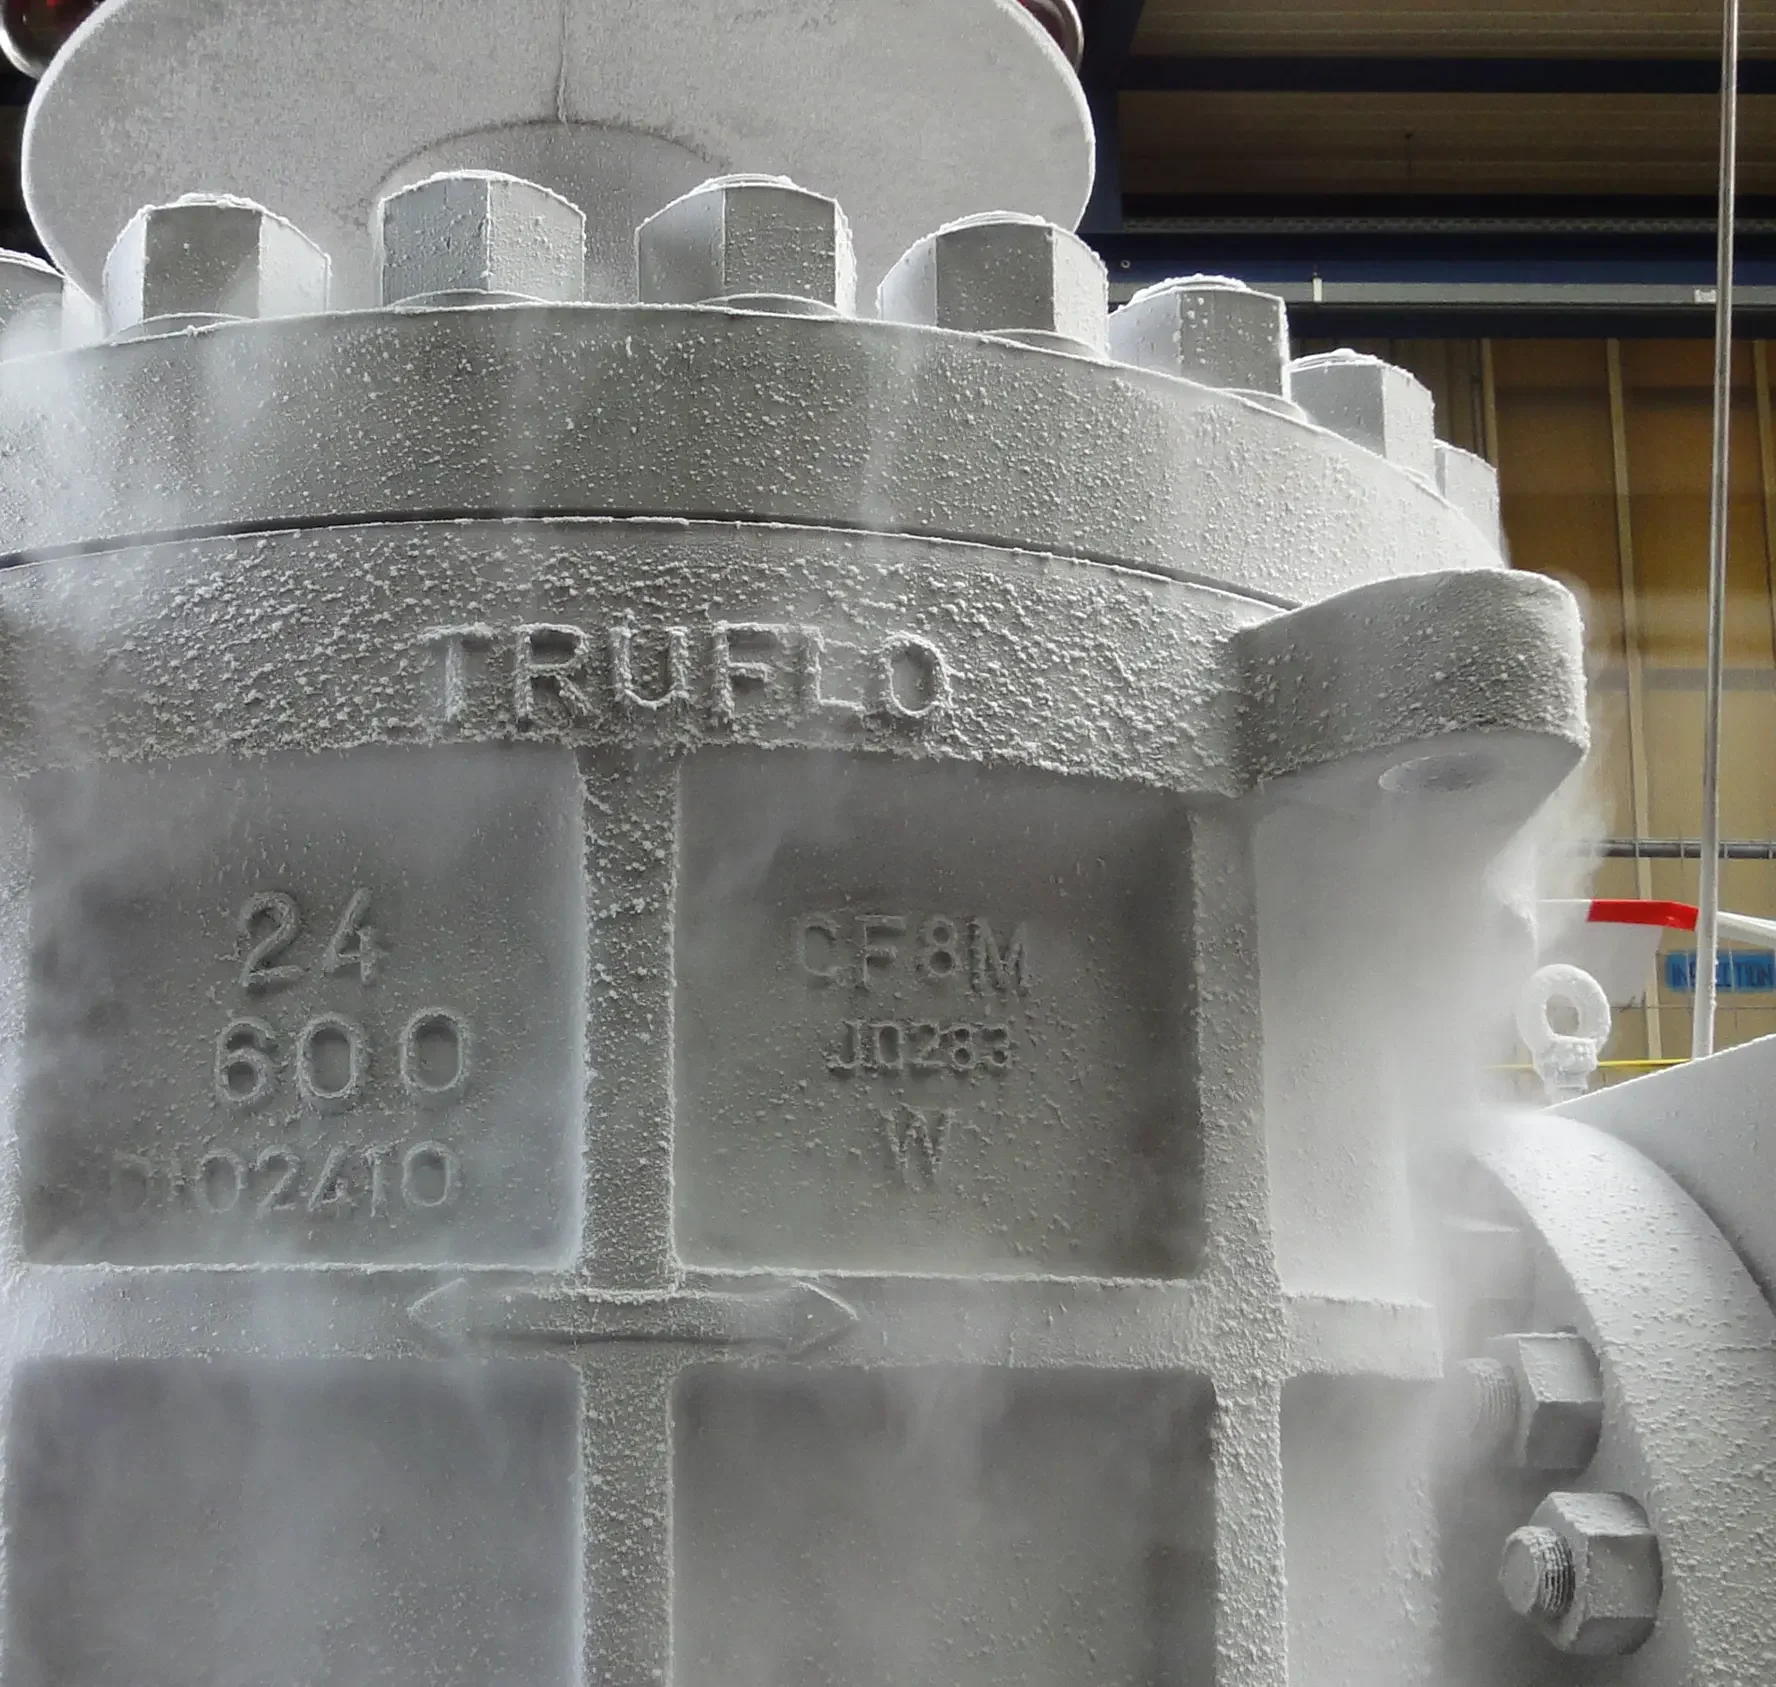 A large IMI Truflo Rona valve being tested under cryogenic conditions, ensuring its functionality in extreme temperature environments.